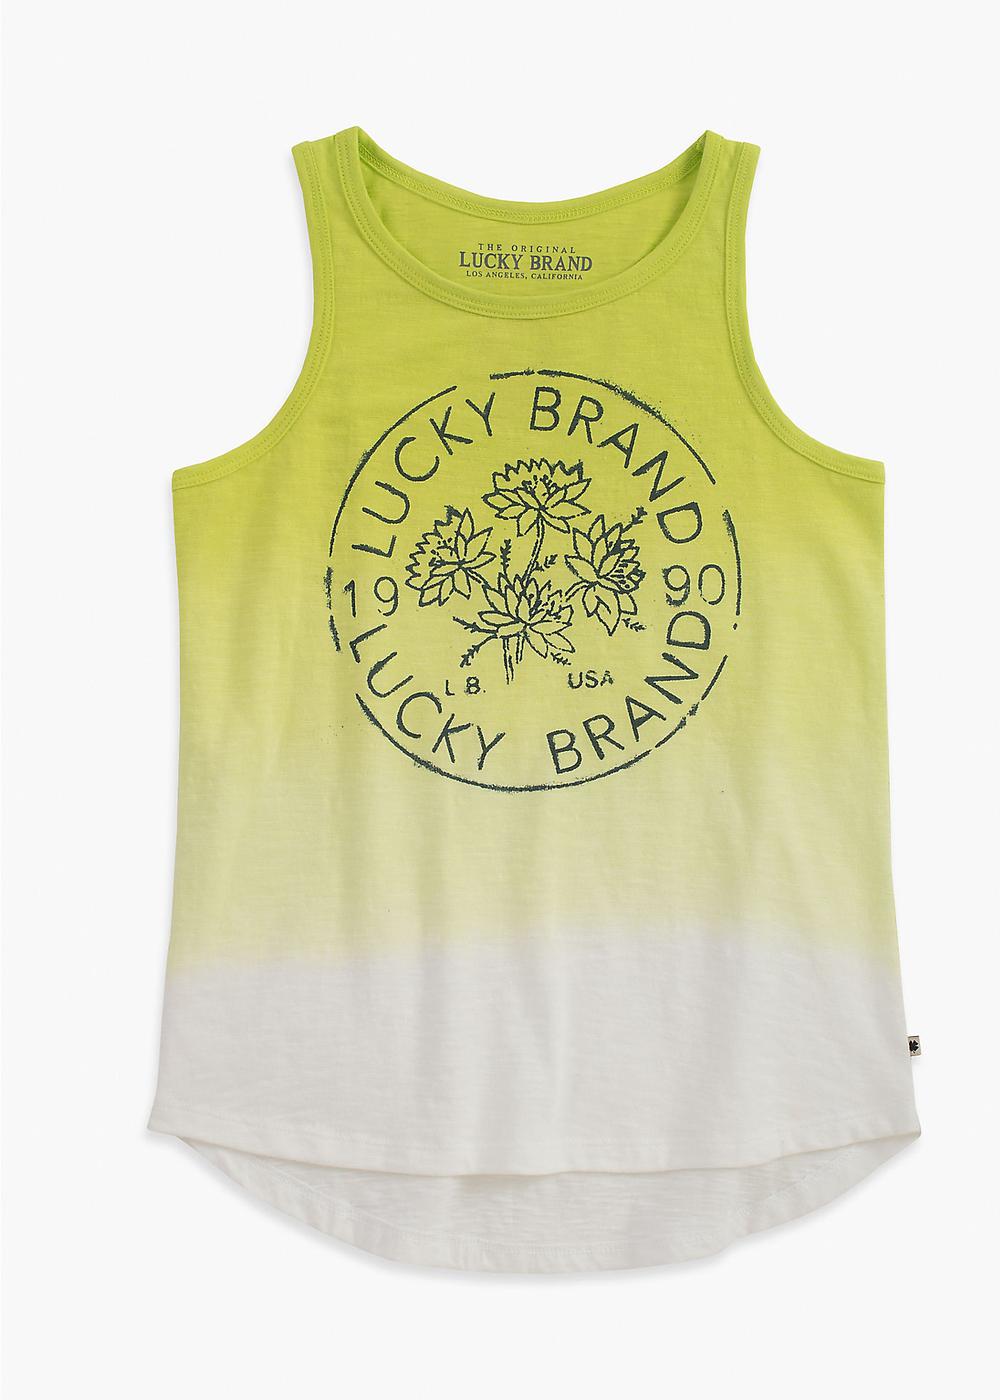 Lucky Brand product